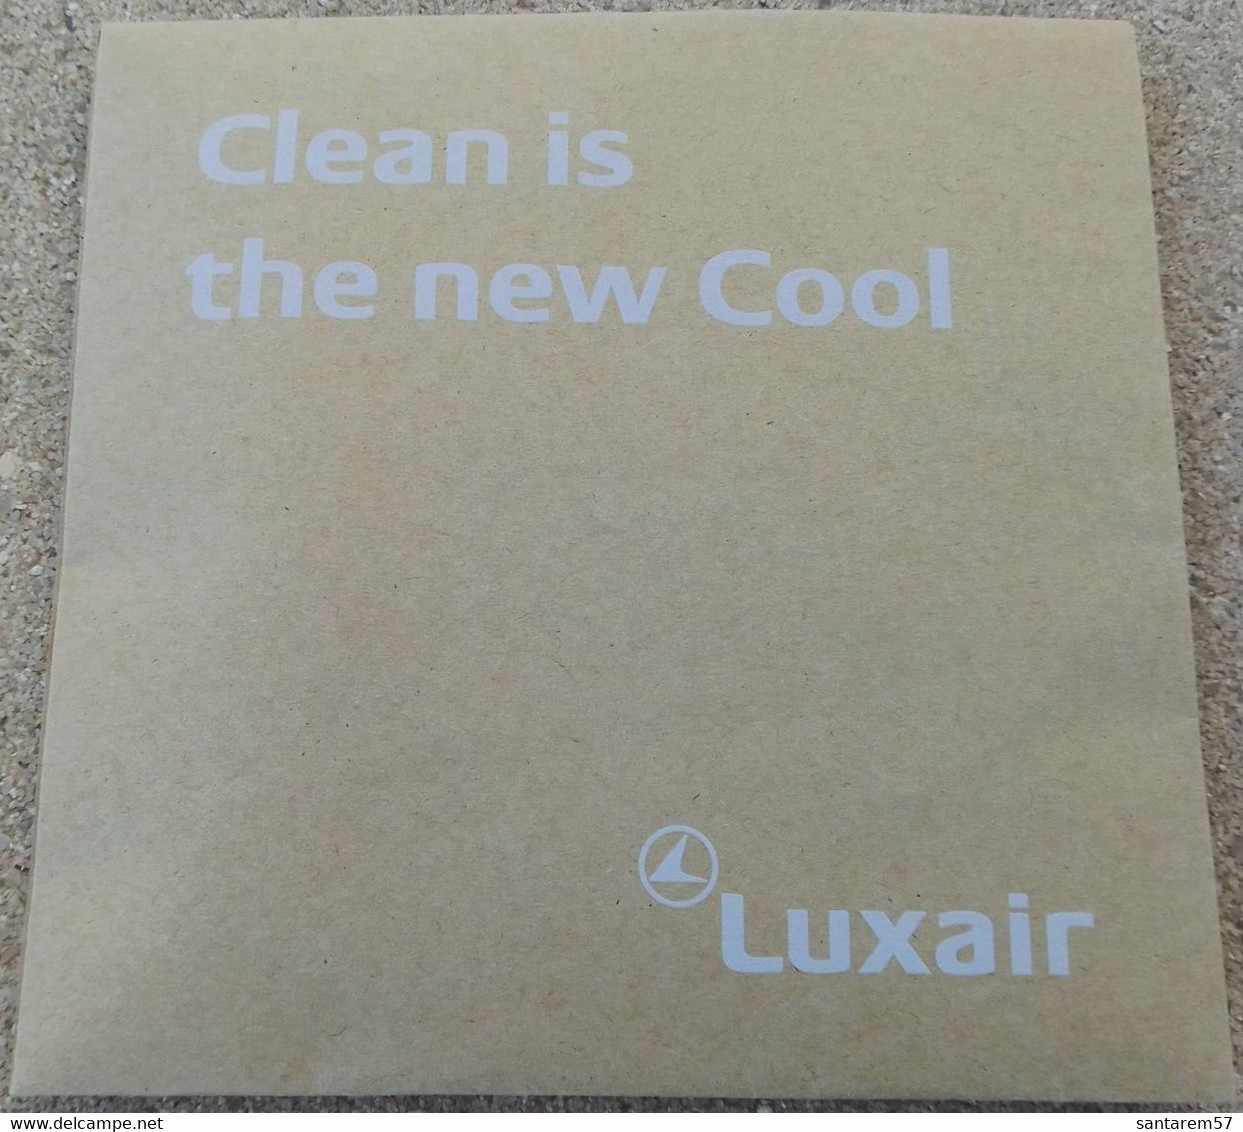 Luxair Pochette Traveller Kit Hygiène Clean Is The New Cool - Advertisements